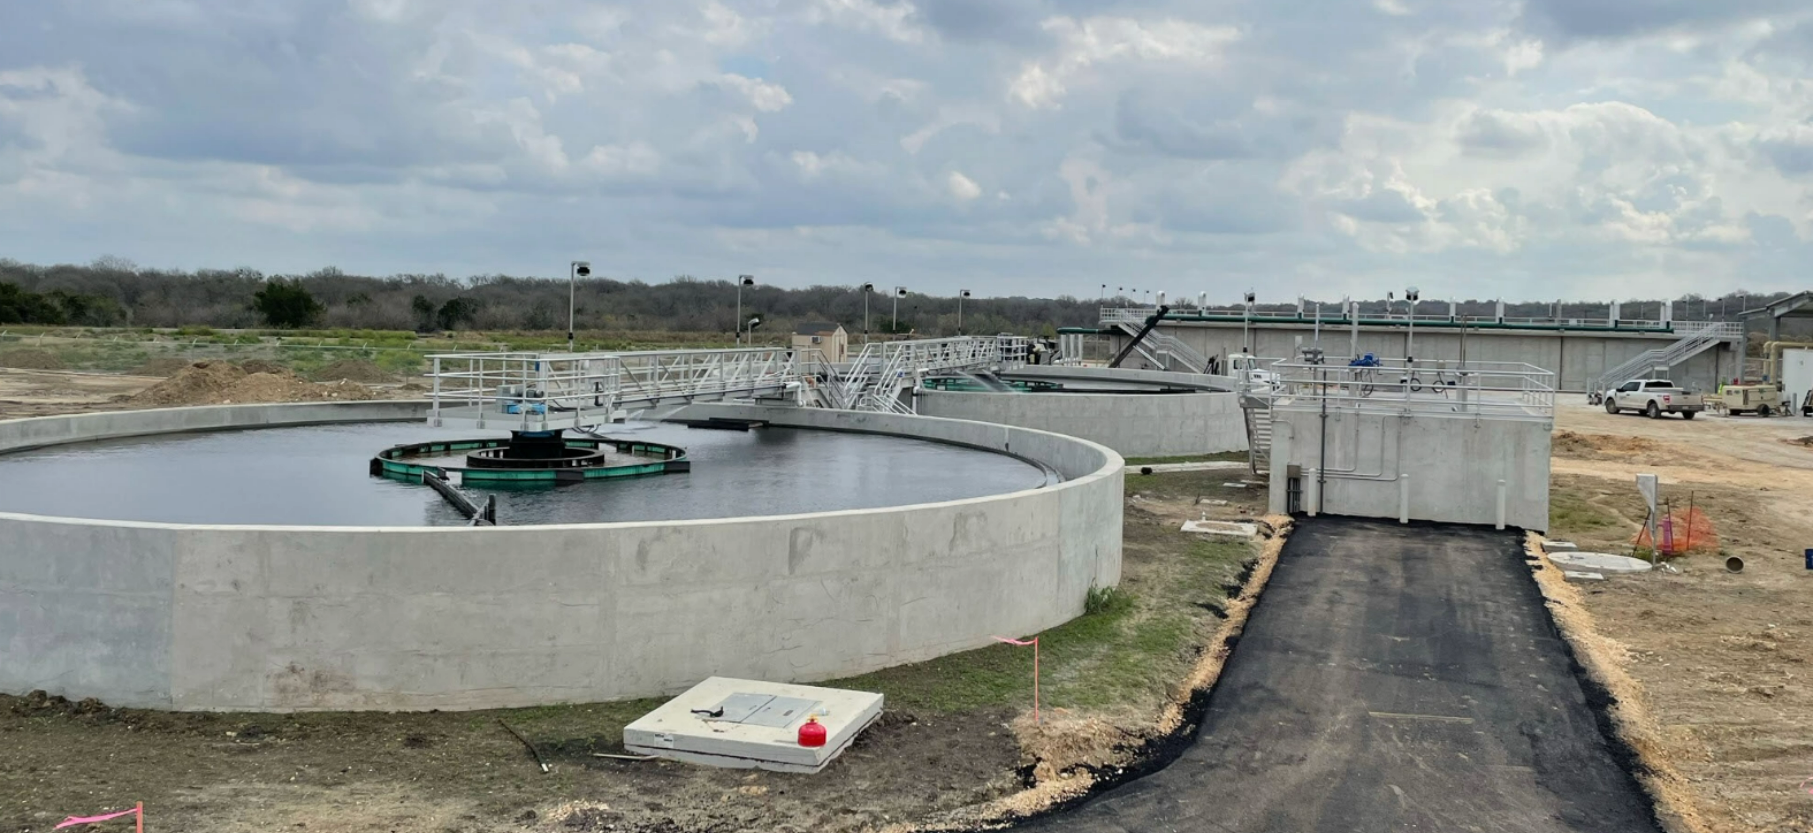 Wastewater treatment plant in Texas